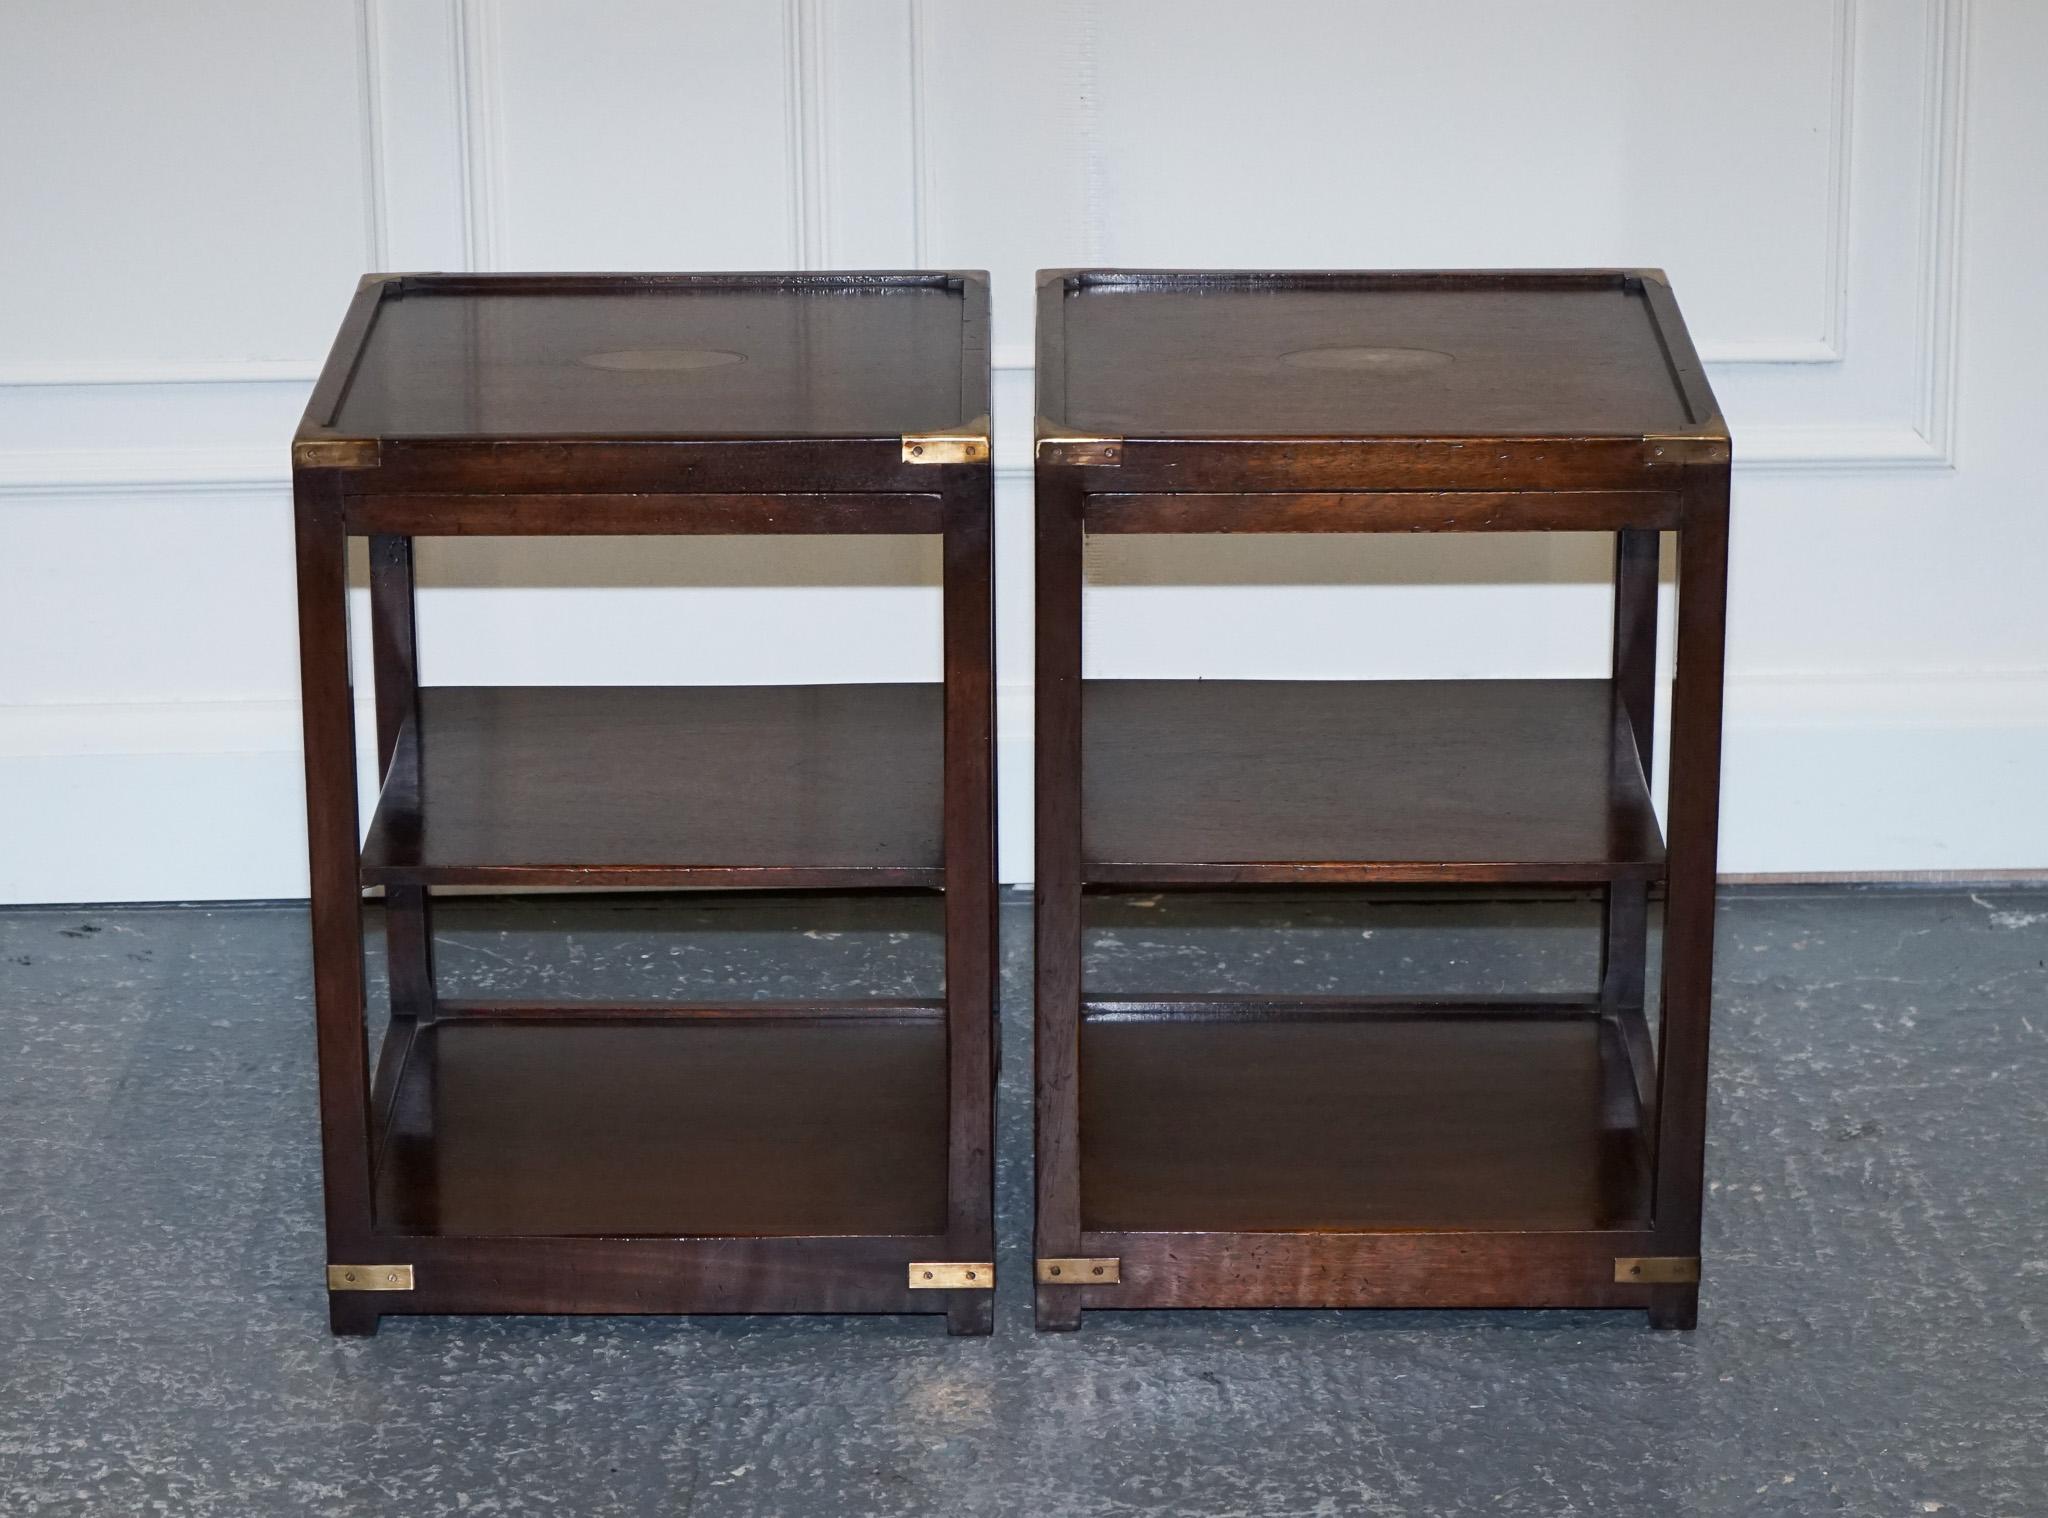 Campaign RESTORED PAiR OF HARRODS KENNEDY DOUBLE SIDED CAMPAIGN SIDE TABLES BUTLER TRAYS 